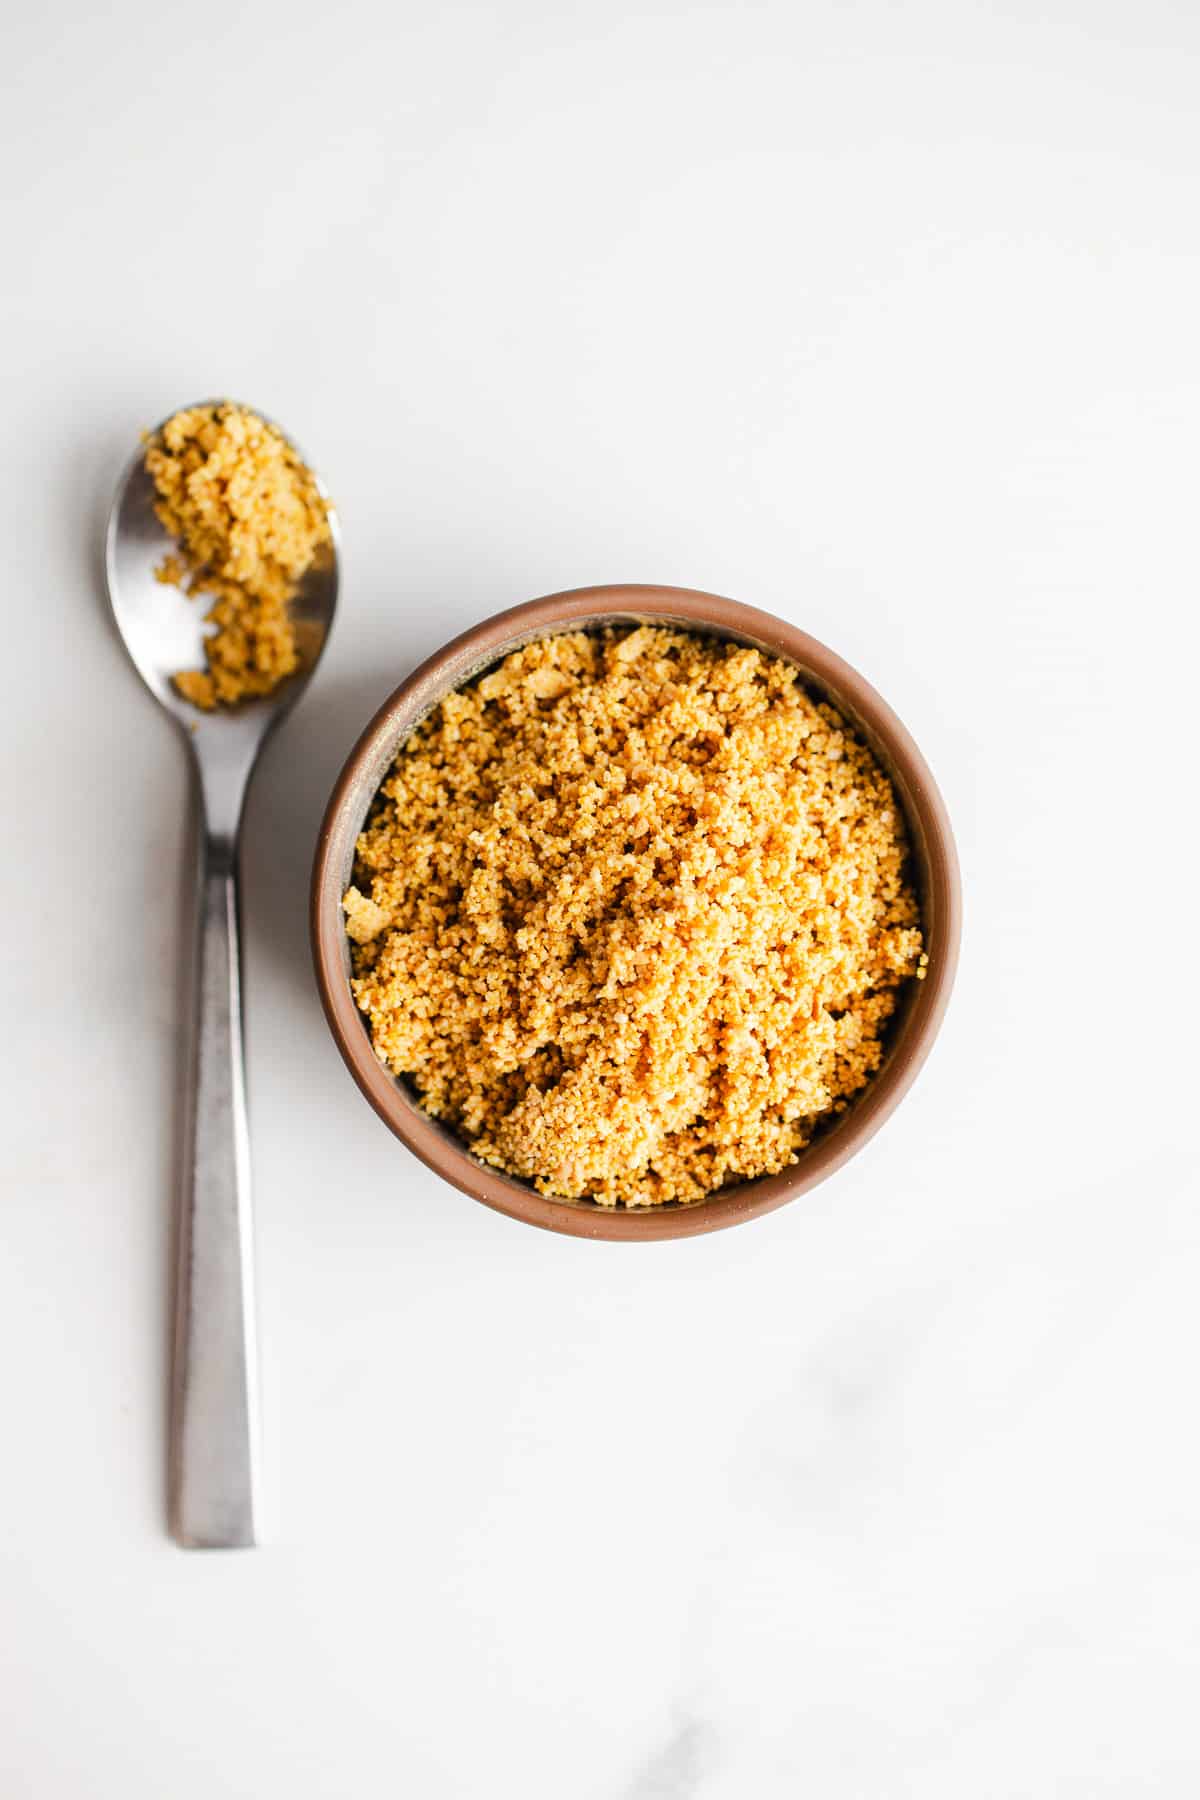 Vegan parmesan cheese topping in a bowl.